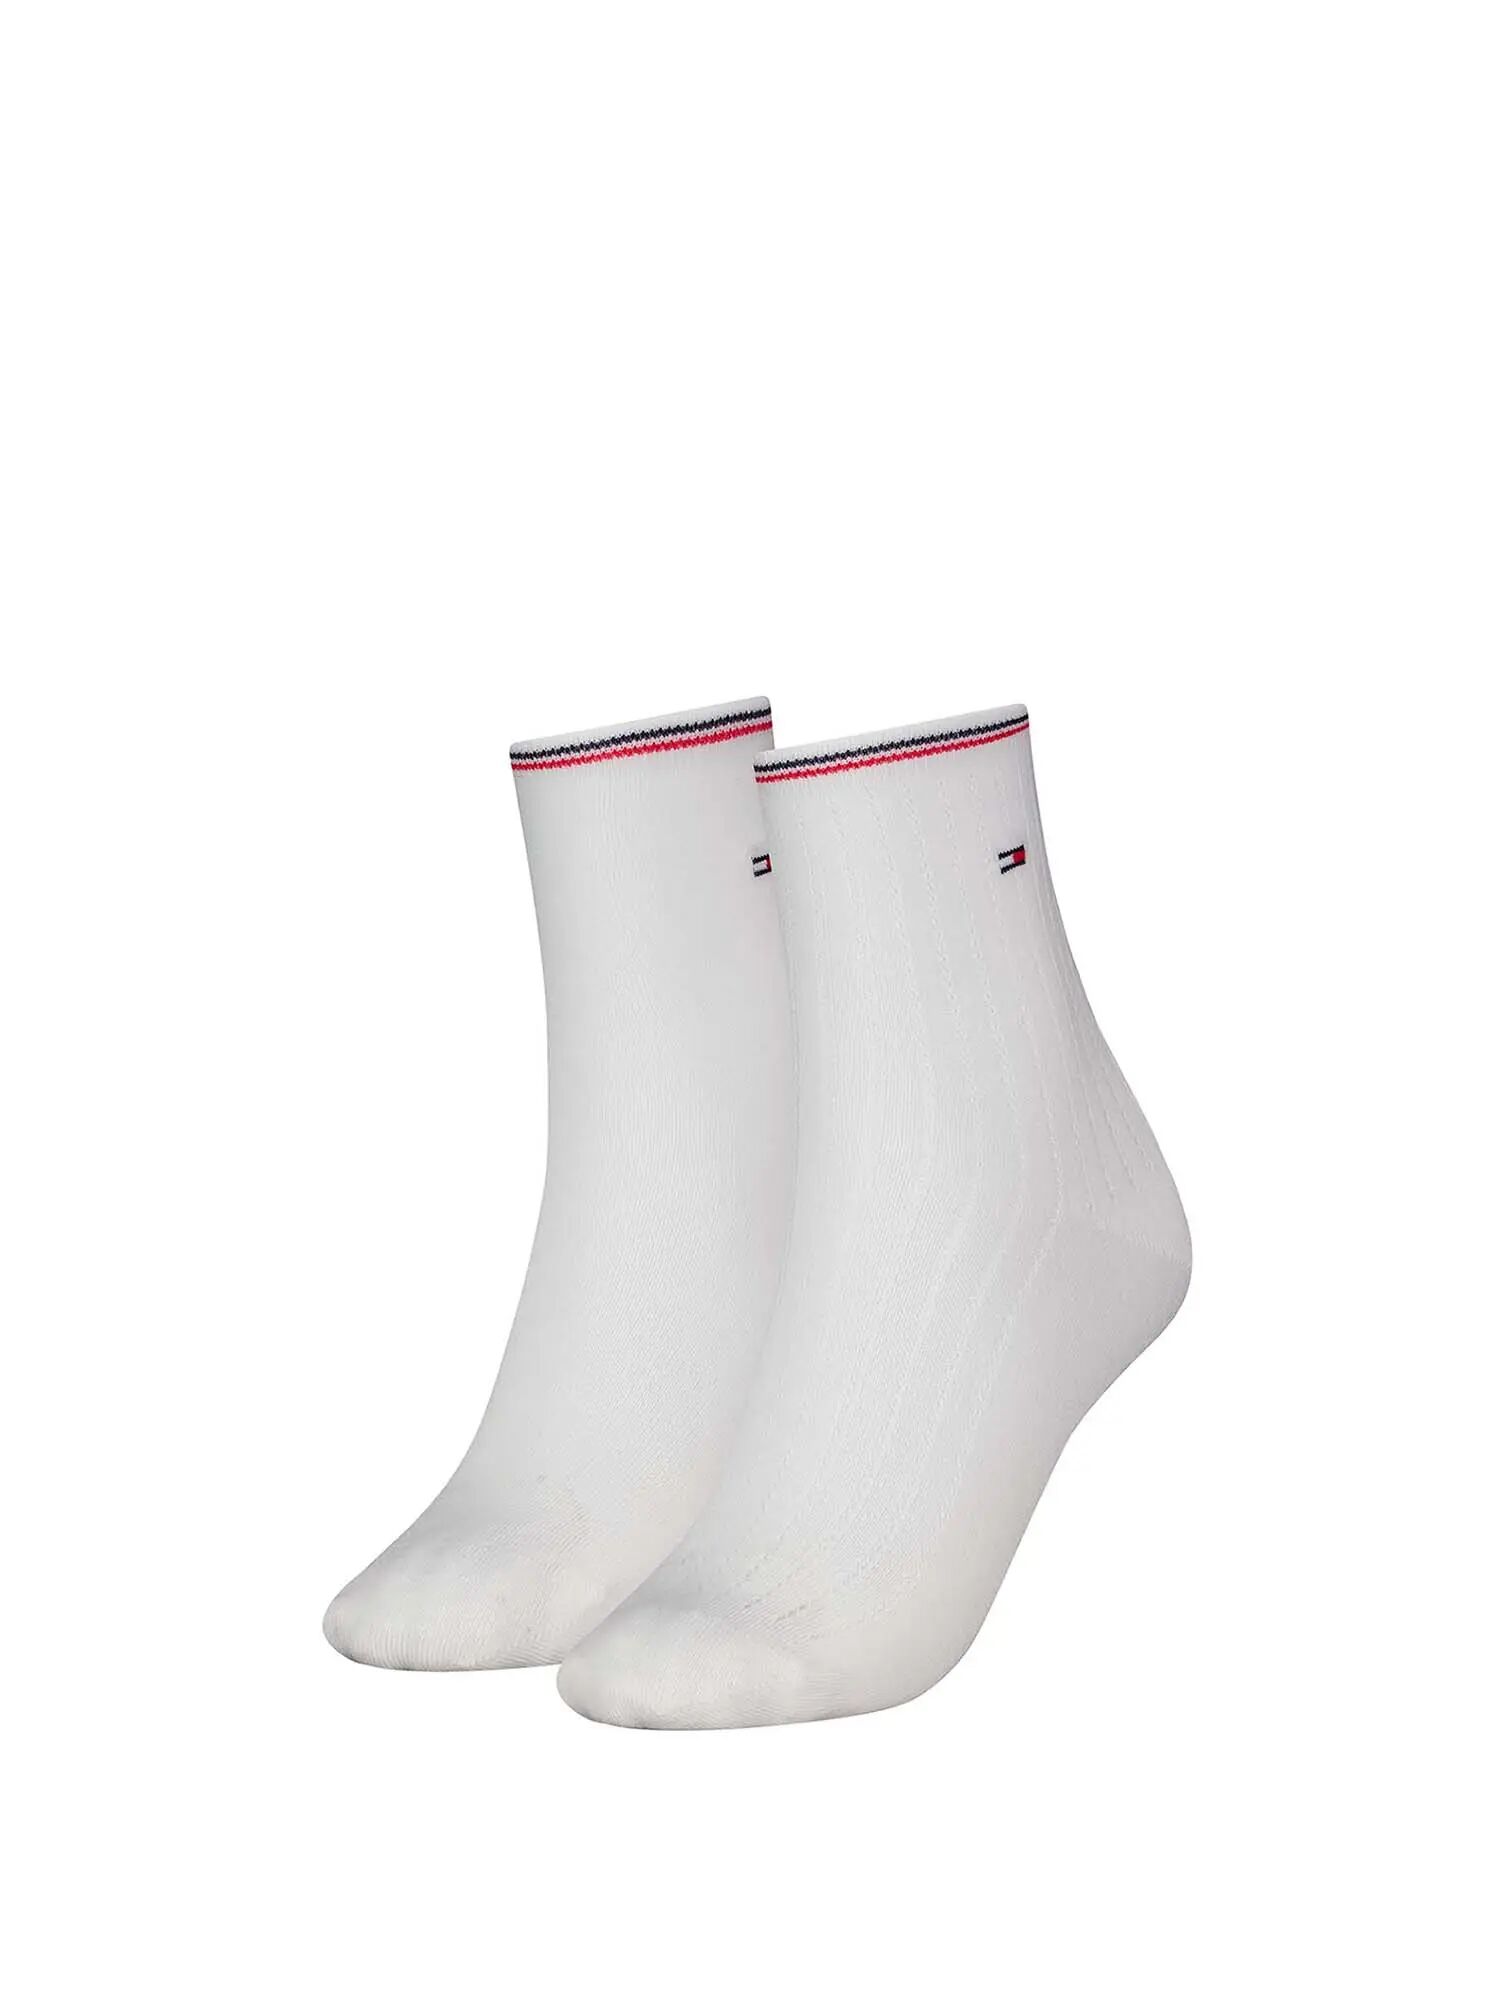 Tommy Hilfiger Calze Donna Colore Bianco BIANCO 39/42